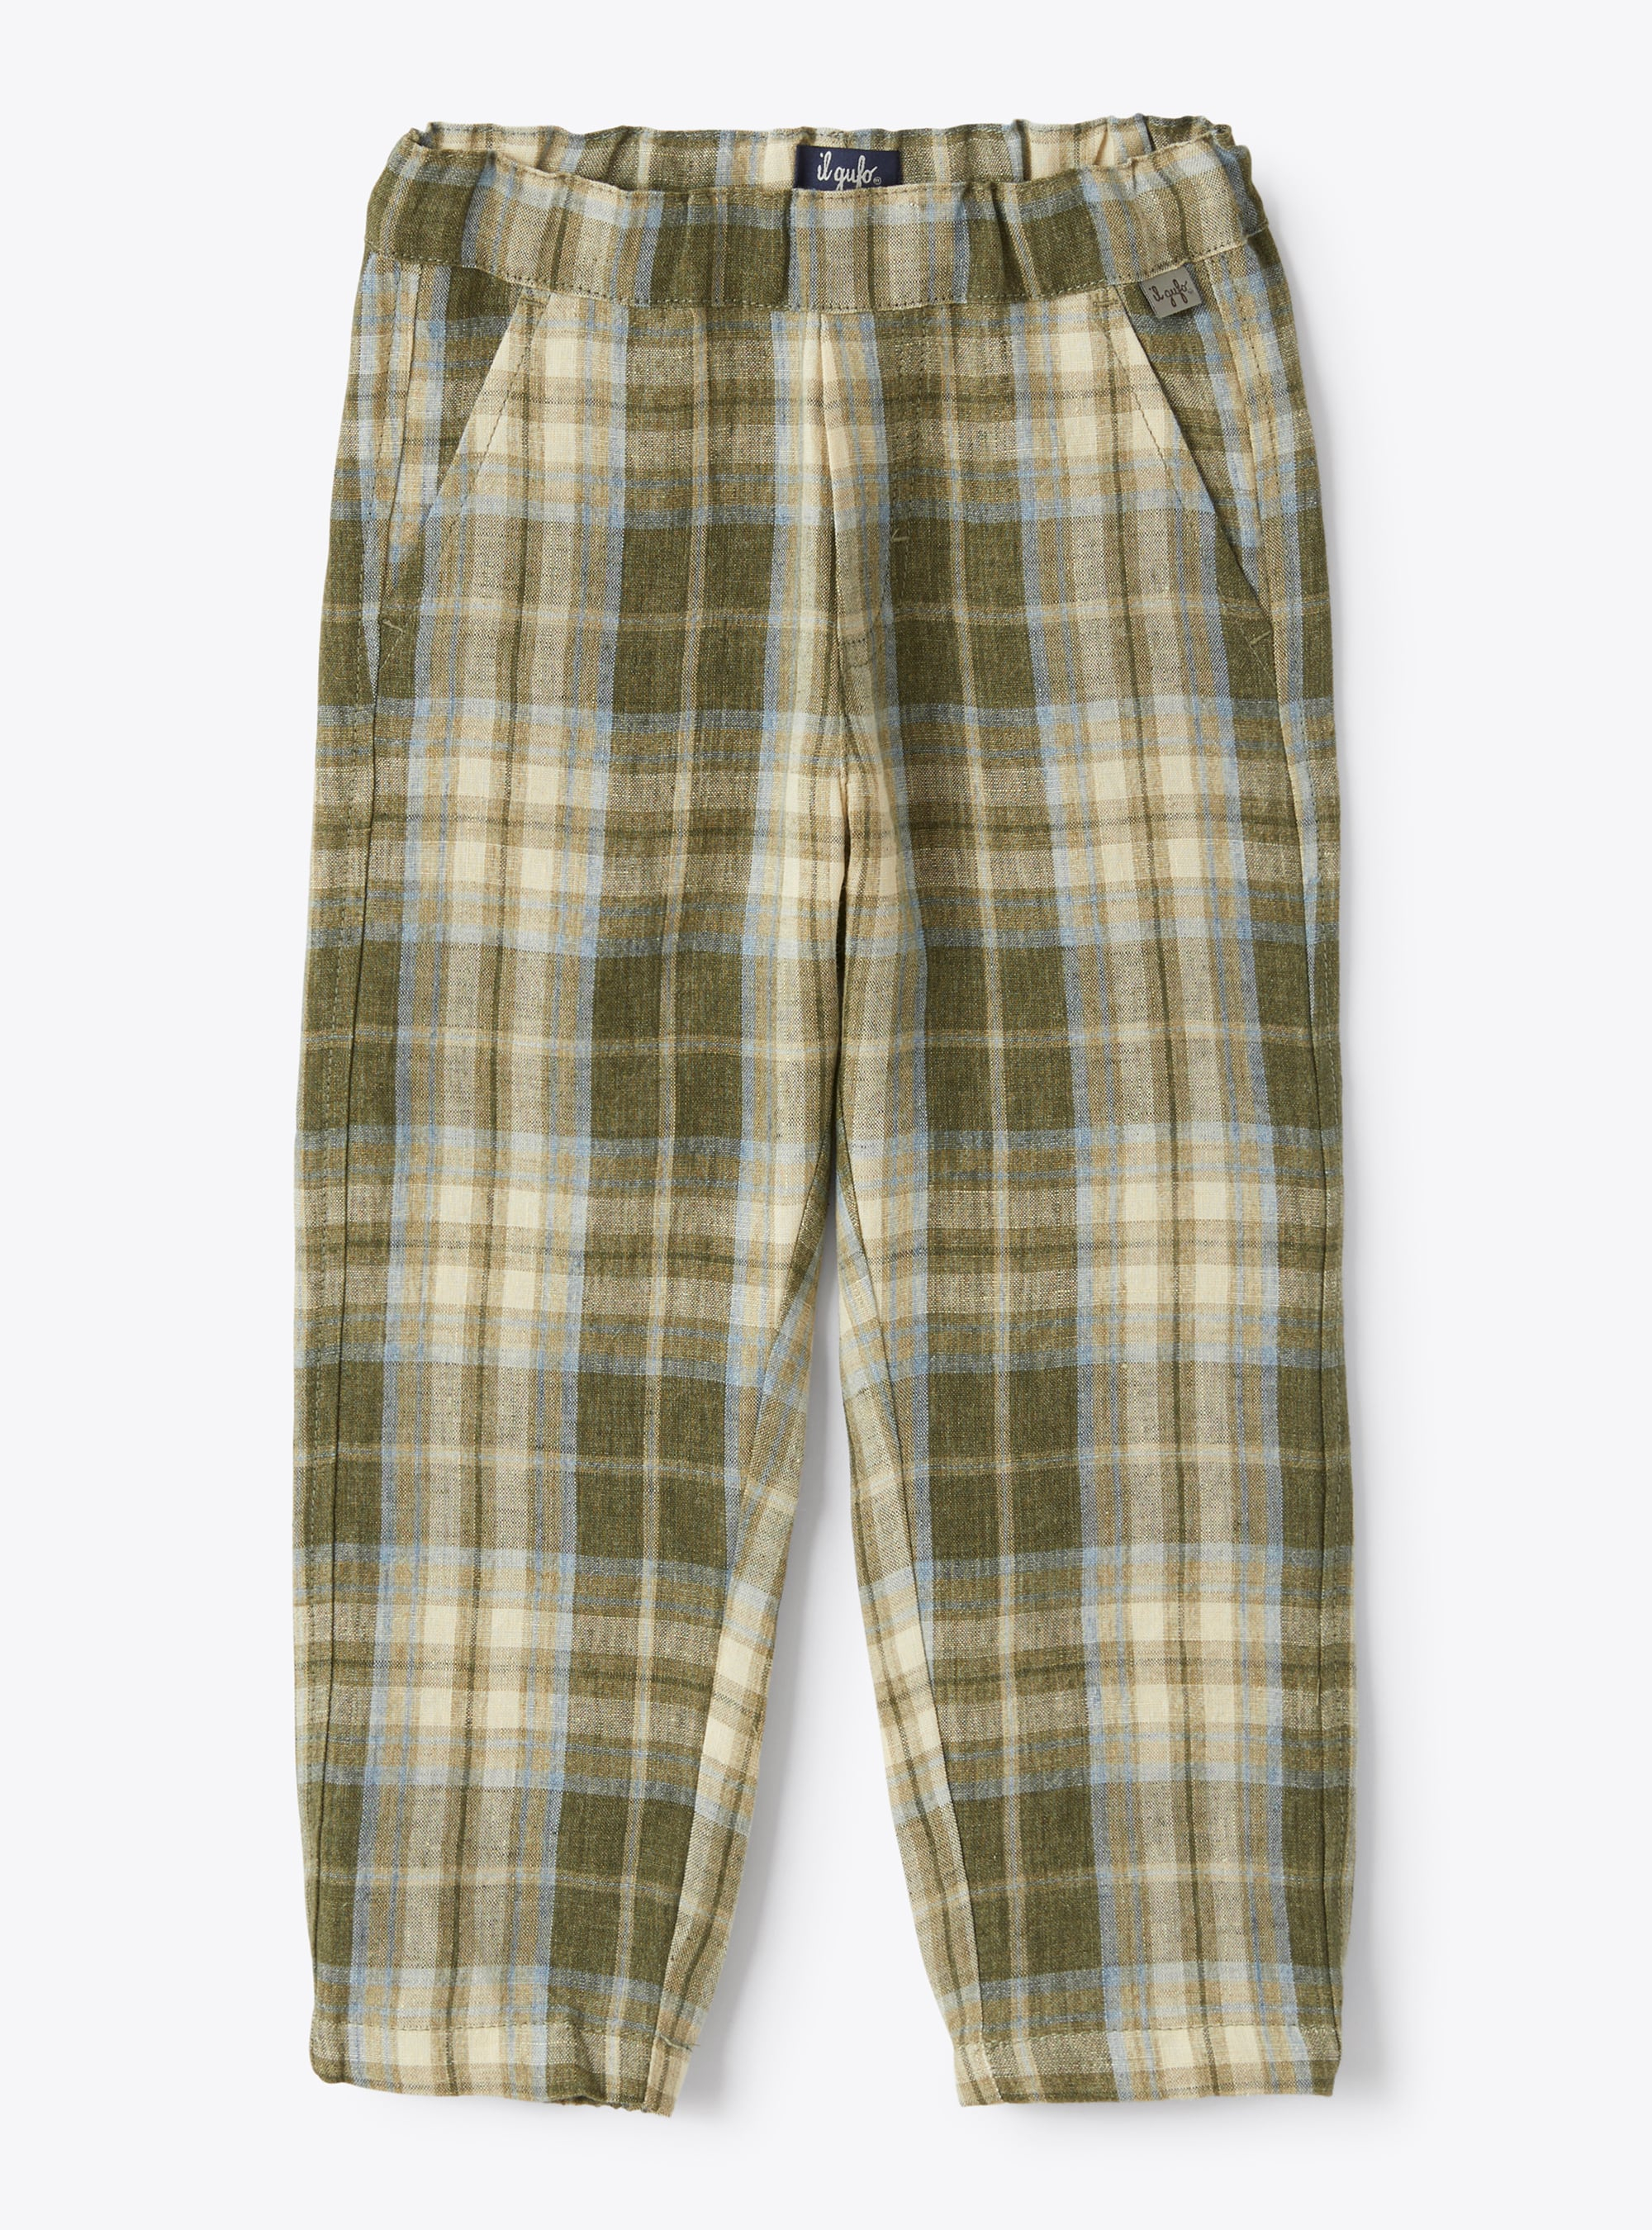 Trousers in green madras-patterned linen - Trousers - Il Gufo